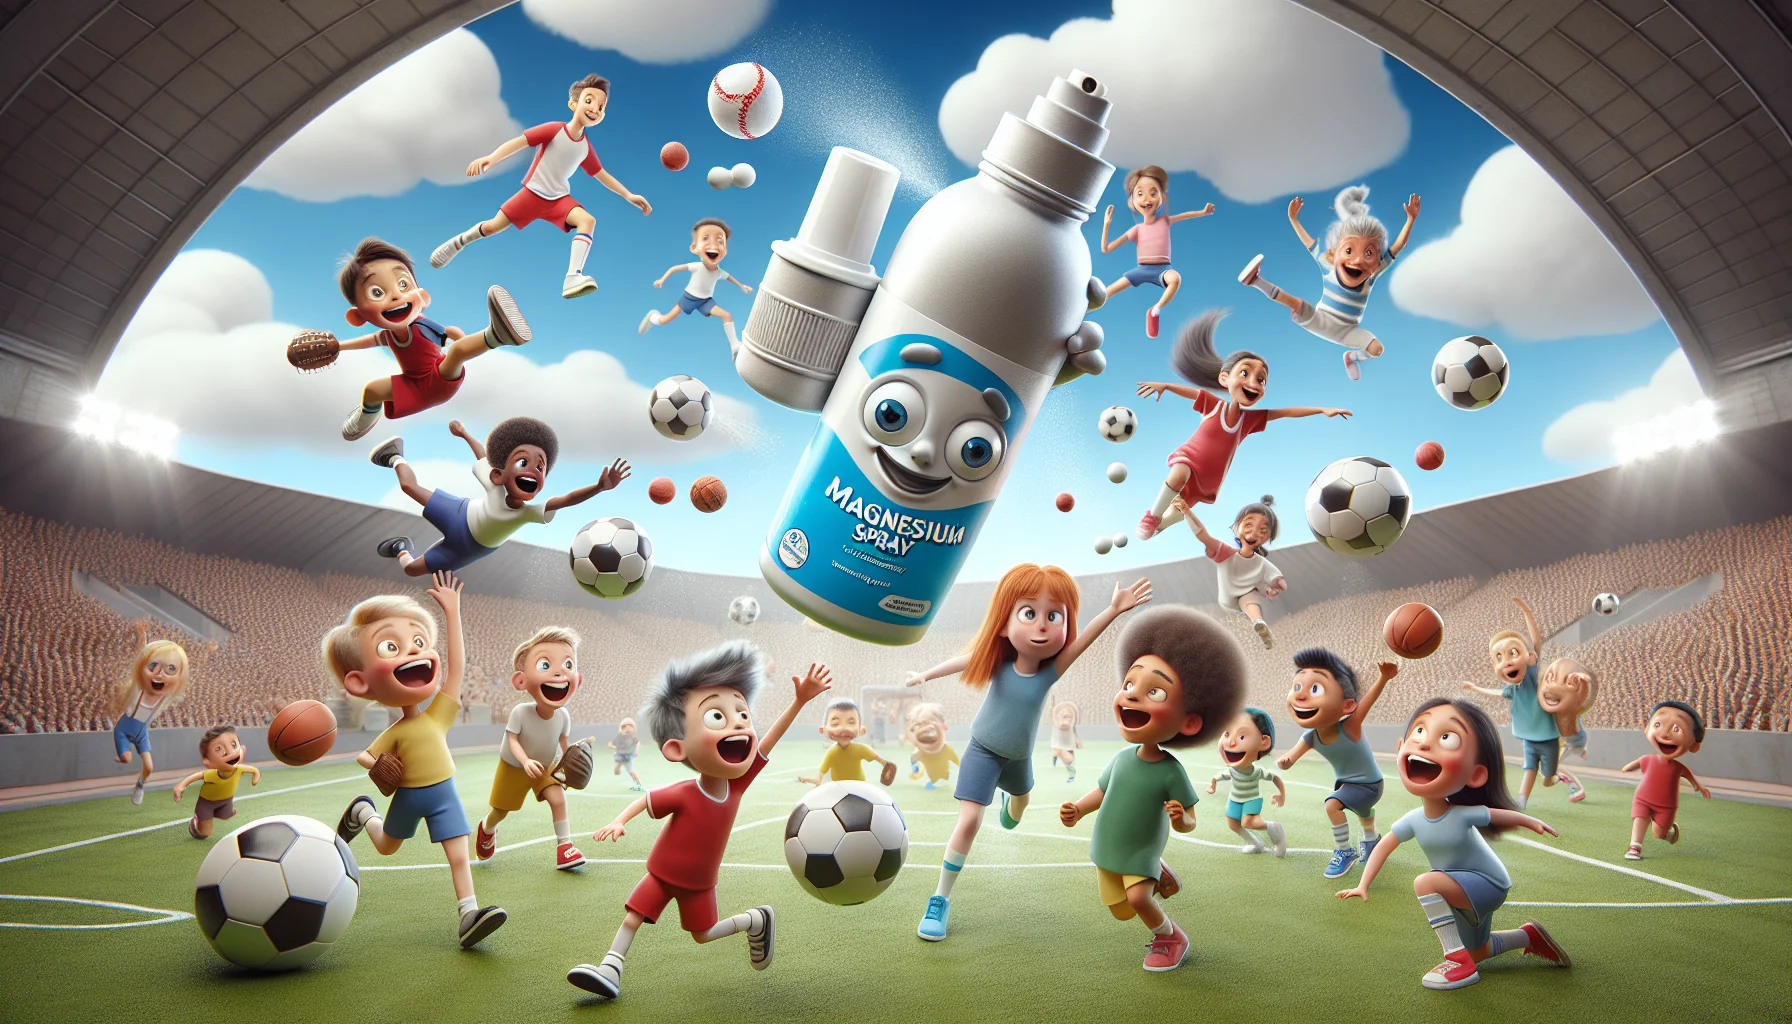 Imagine a playful, cartoon-like scenario promoting magnesium spray aimed at children. The central focus is a quirky magnesium spray bottle, designed with friendly eyes and smile, engaged in a variety of sporting activities. This includes dribbling a soccer ball, throwing a baseball, and doing a cartwheel. It's surrounded by a small crowd of children, of diverse descent and gender, all excitedly reaching for the magical bottle. They are in full sports gear, ready to enhance their performances, and their expressions demonstrate enthusiasm and eagerness. Capturing the essence of fun, this image is intended to make the idea of sports supplements appealing to youngsters.